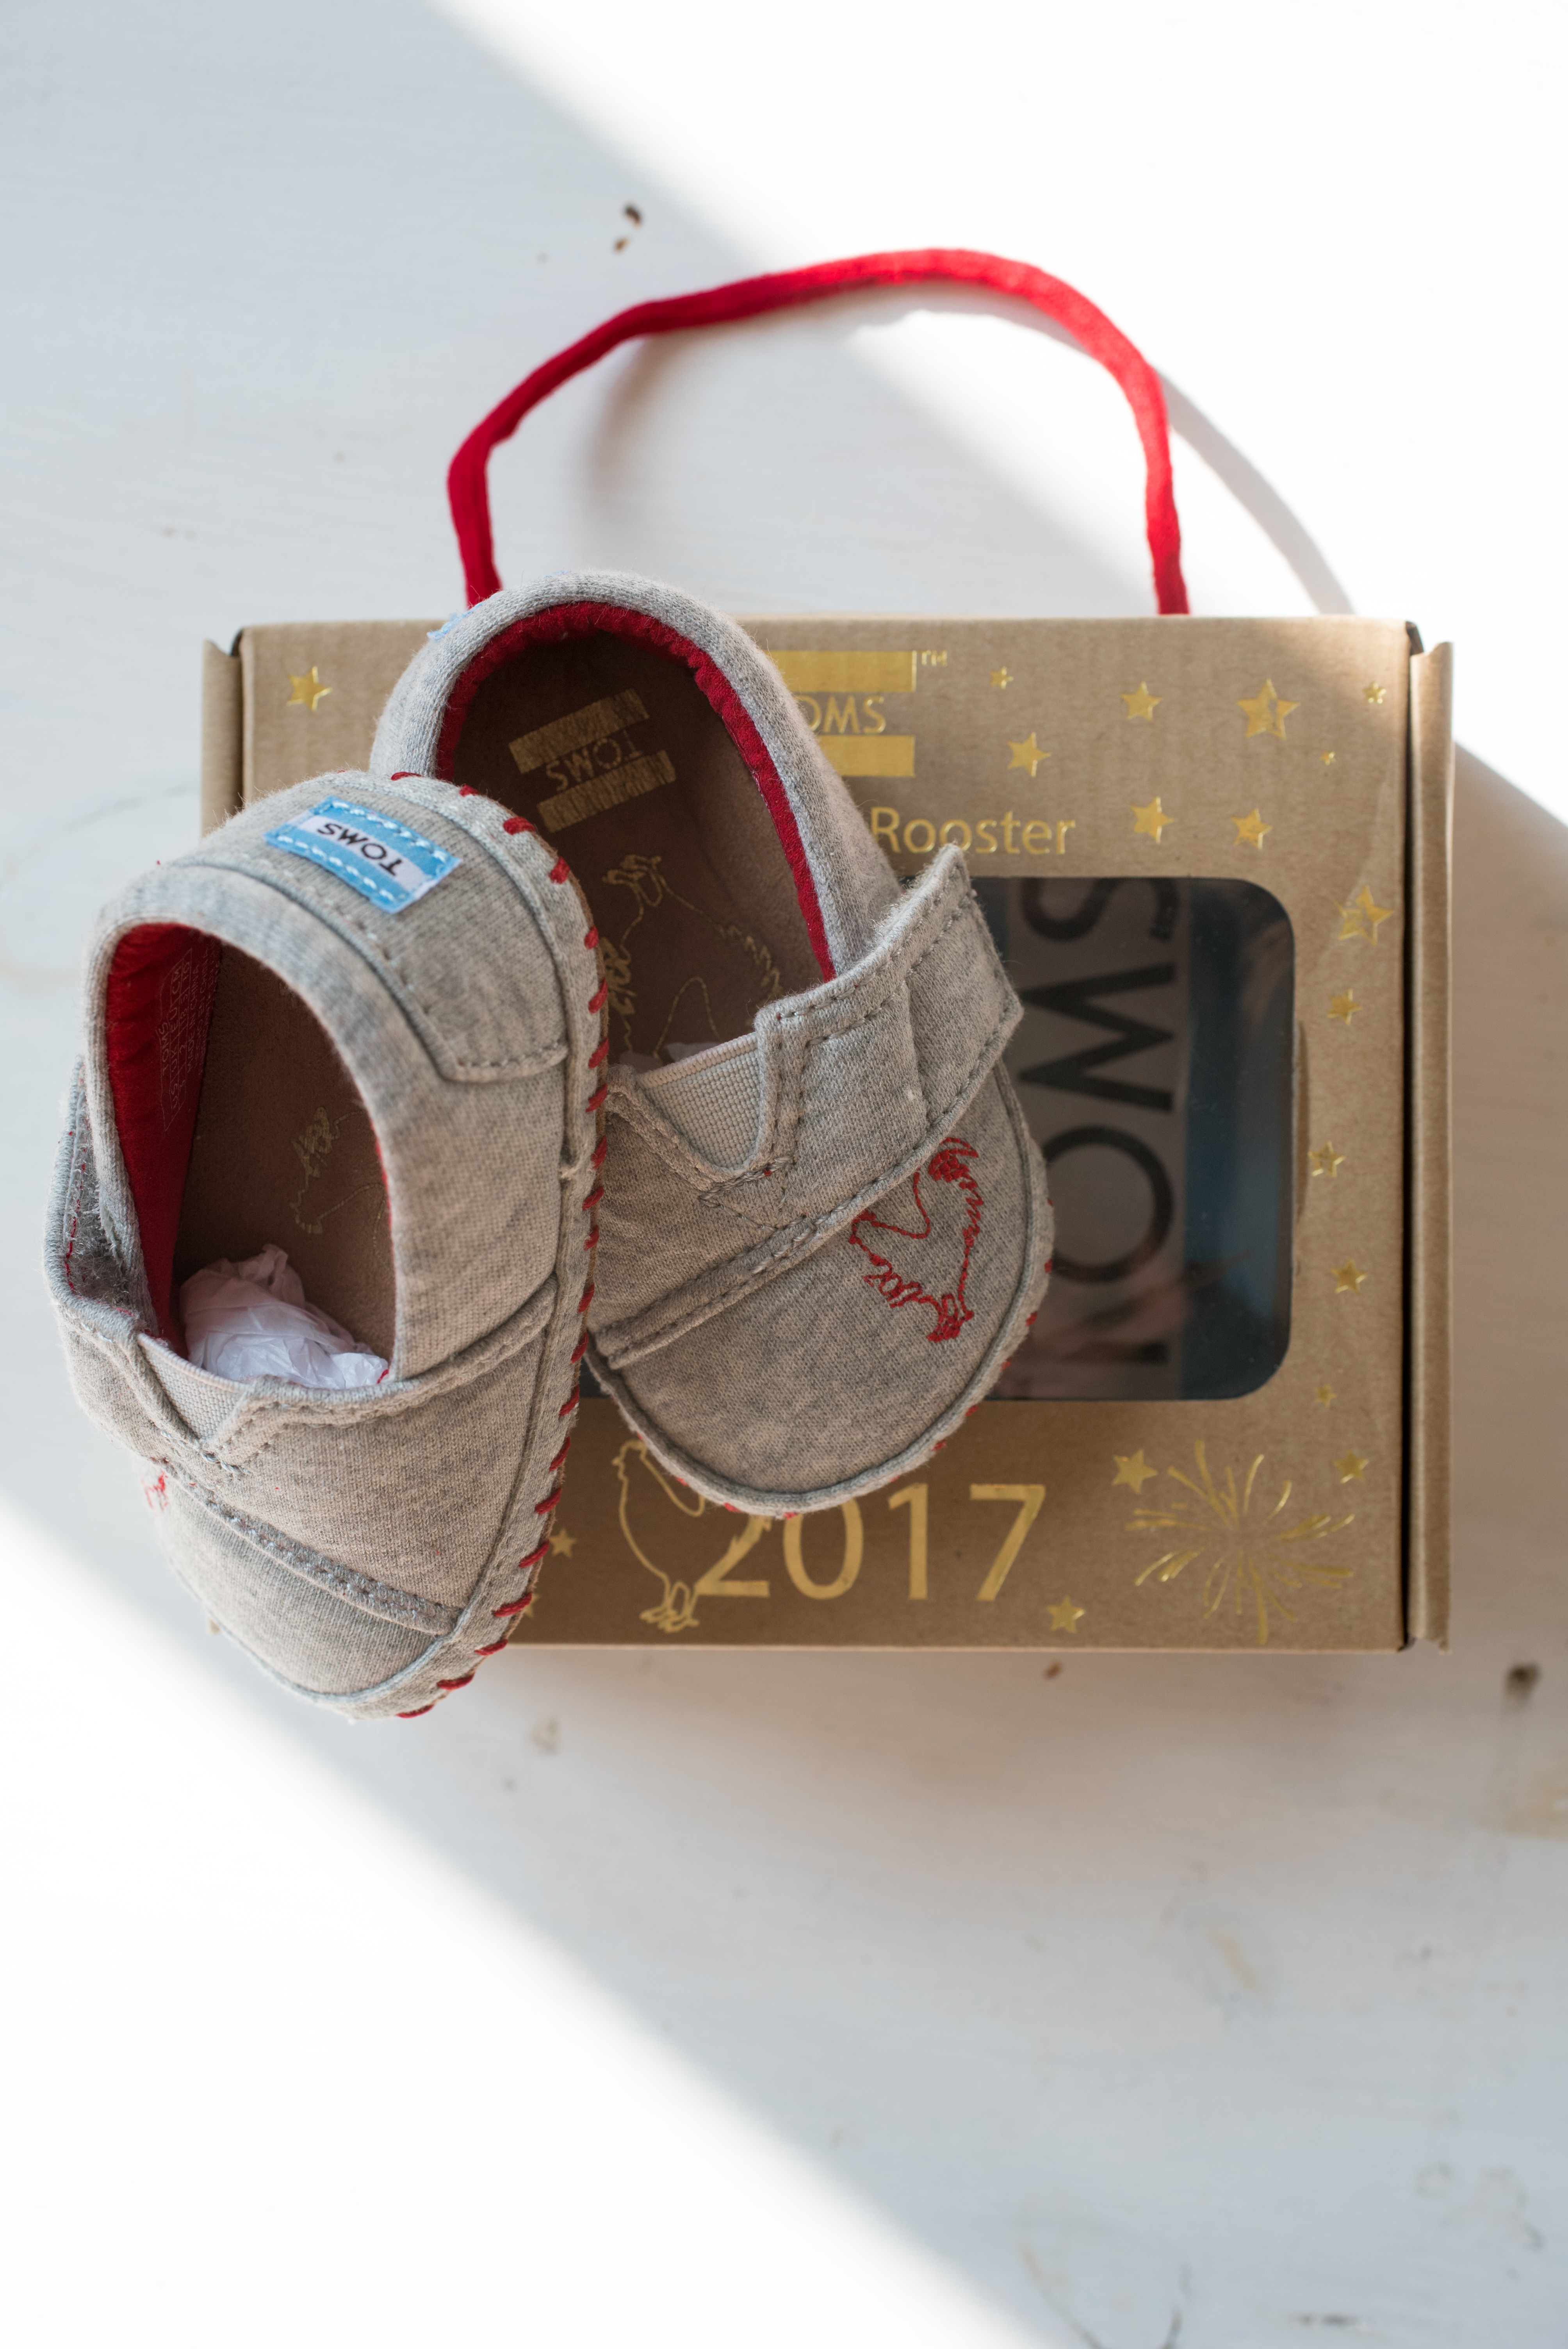 TOMS Baby Shoes Rooster 2017